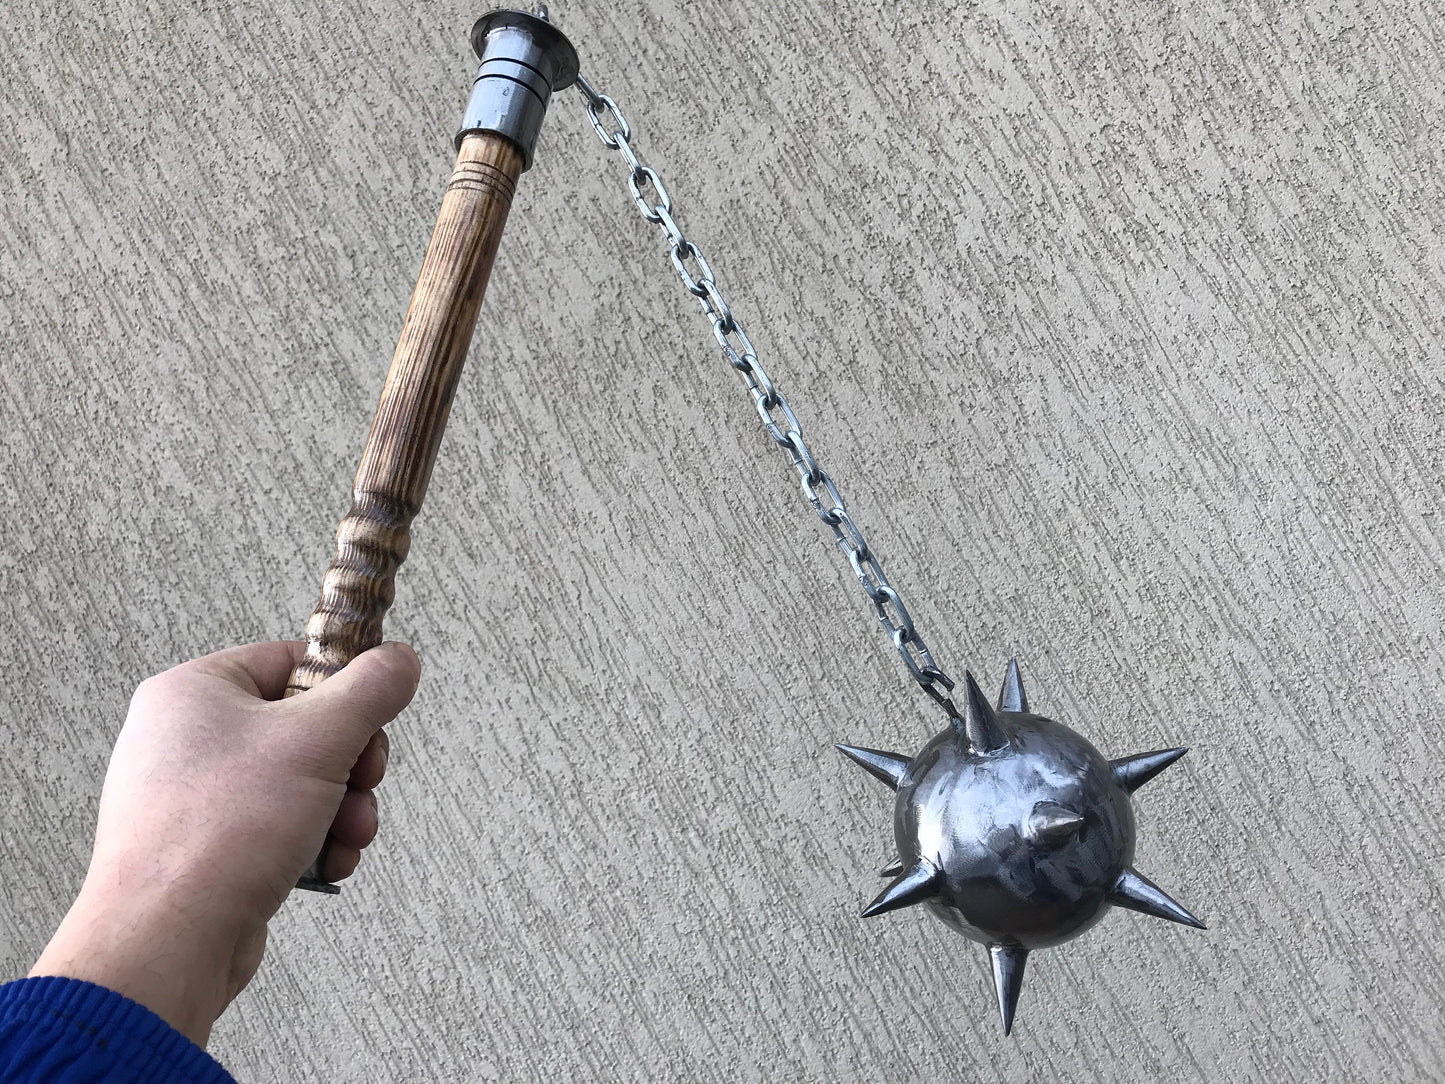 War mace, viking mace, hand crafted mace, mace, flail, chain flail, medieval weapon, viking weapon, viking axe, mens gifts, gift for men,axe